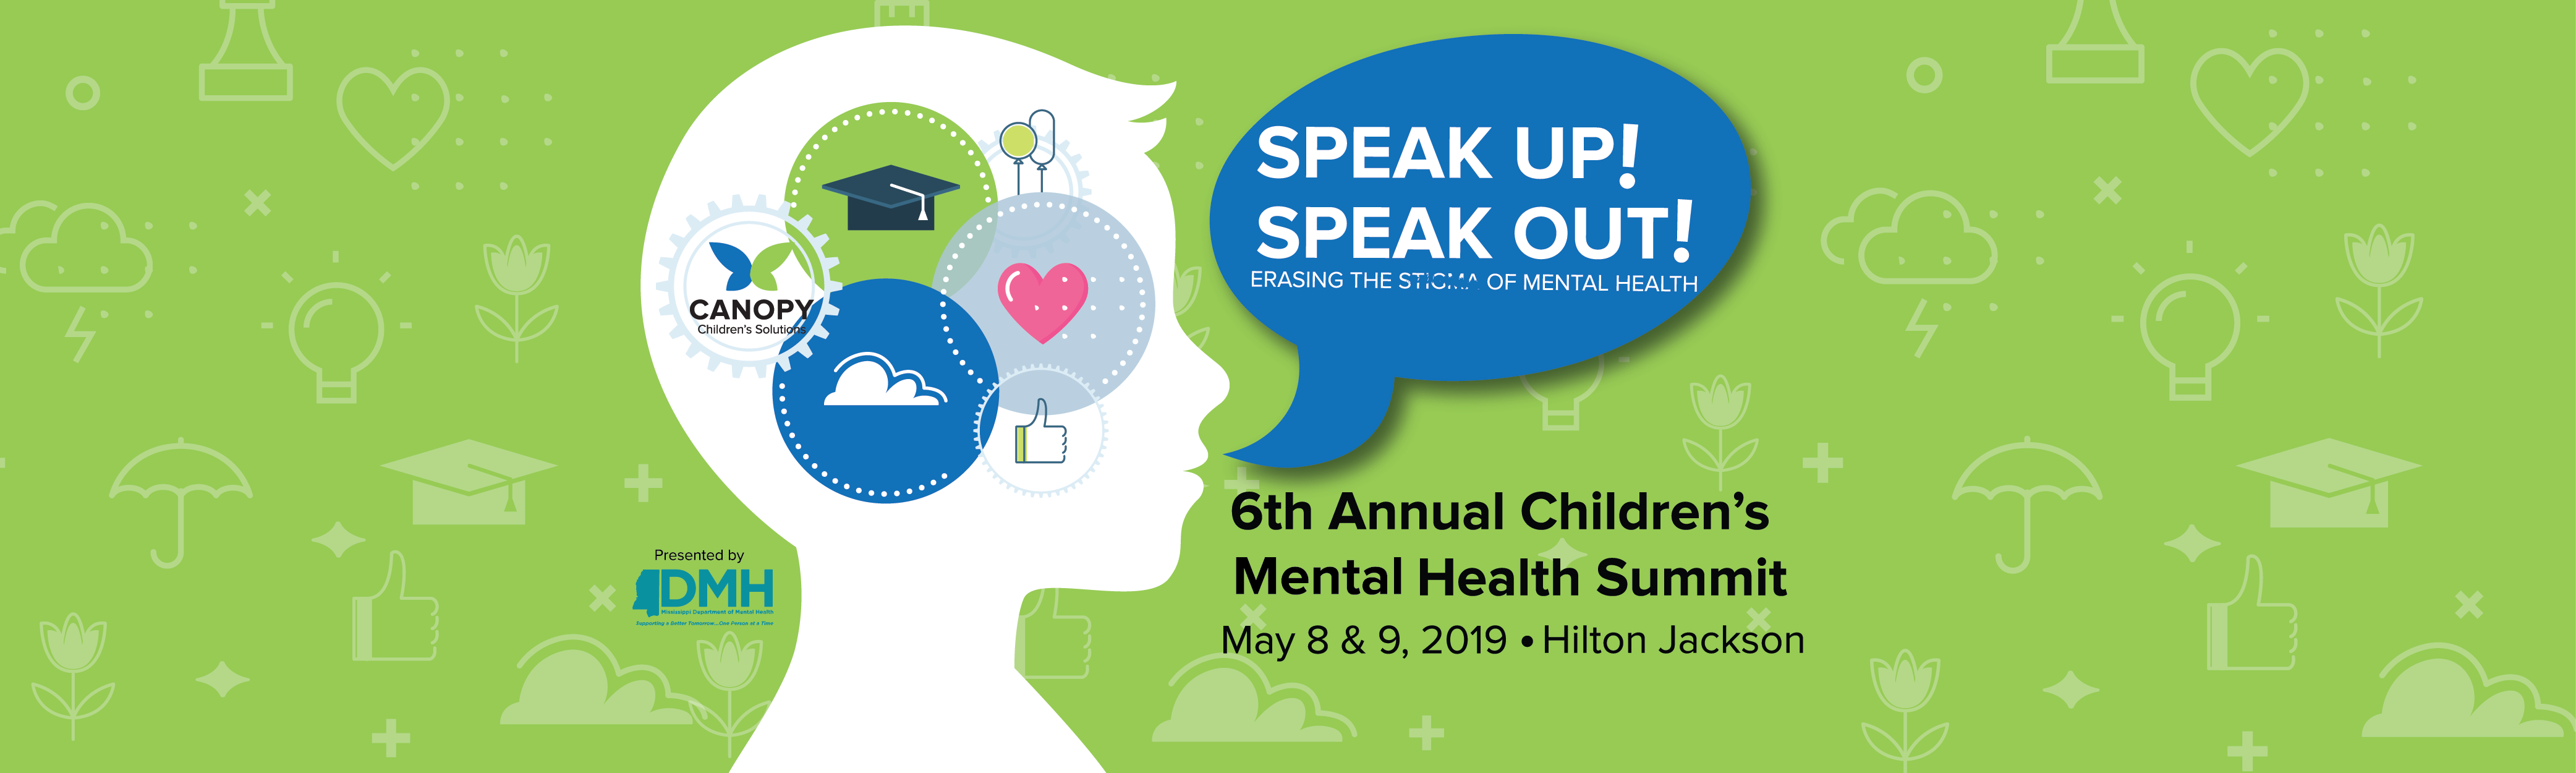 Join Canopy for Children’s Mental Health Summit